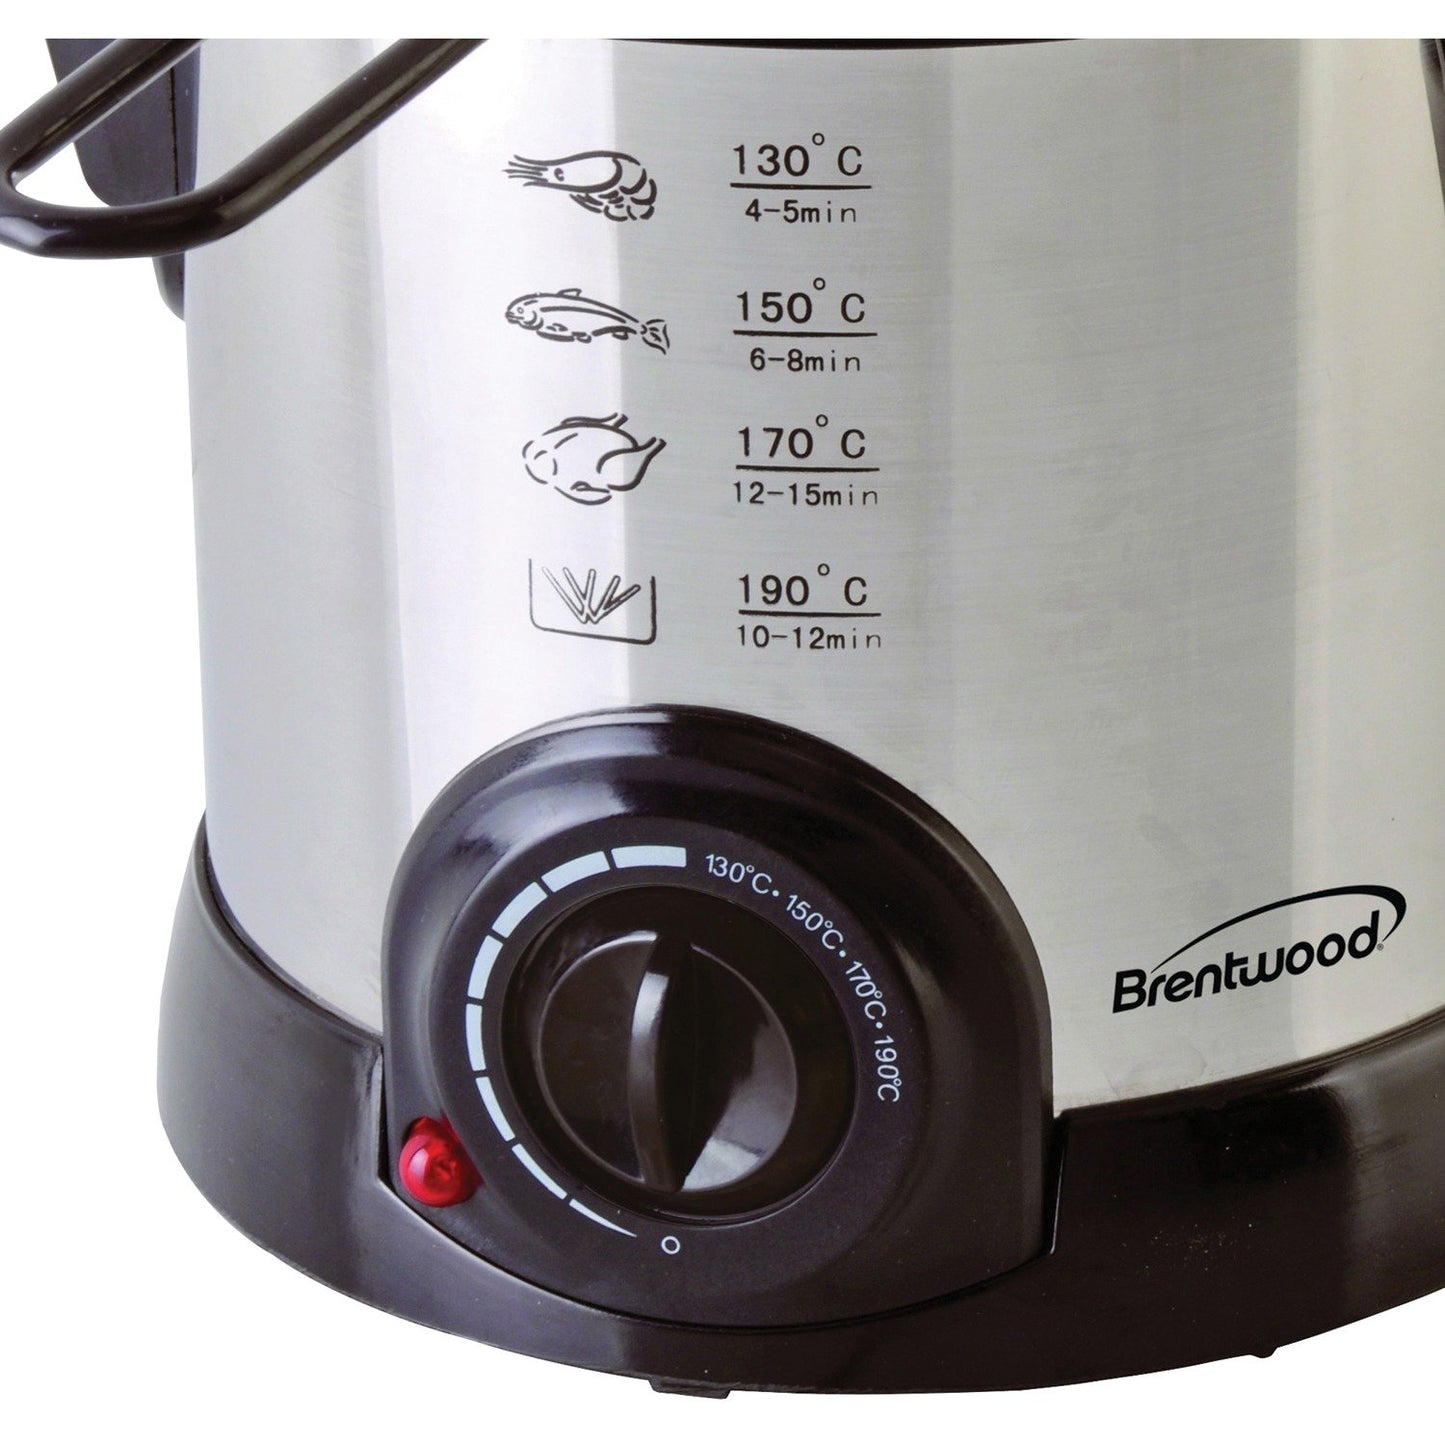 Brentwood Appl. DF-701 1L Stainless Steel Electric Deep Fryer